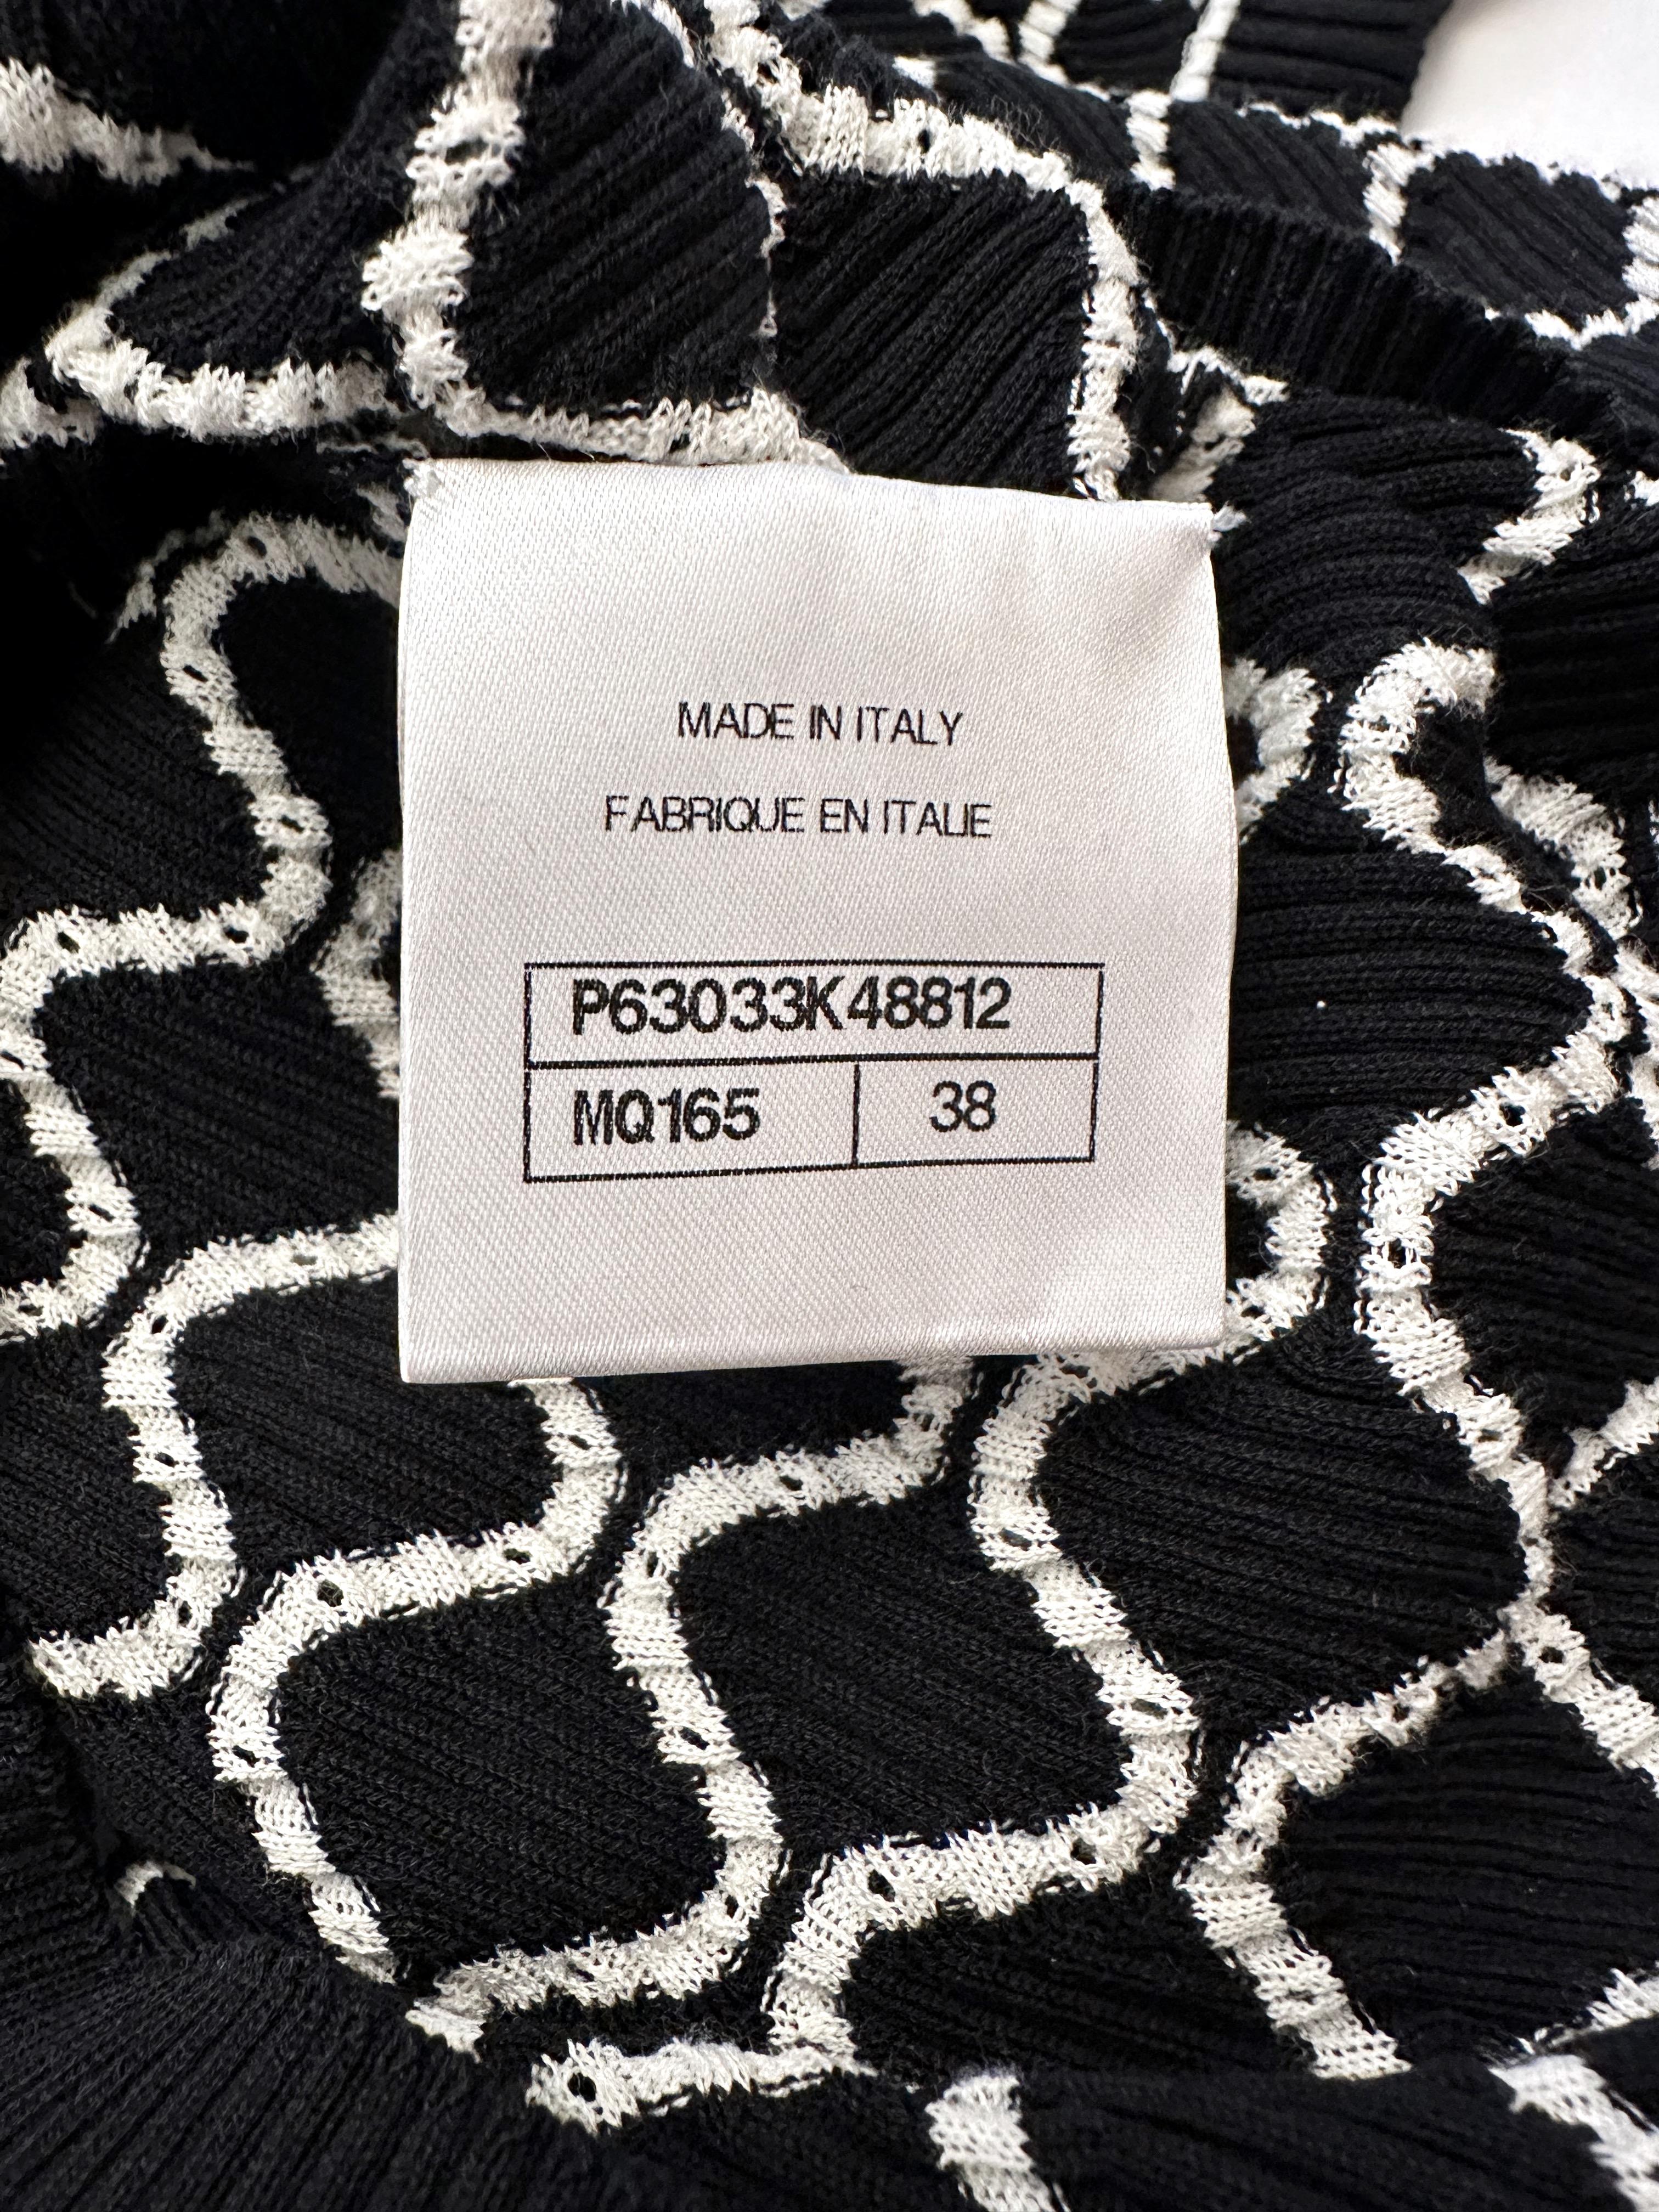 Chanel Black and White Cotton Knit Top 3